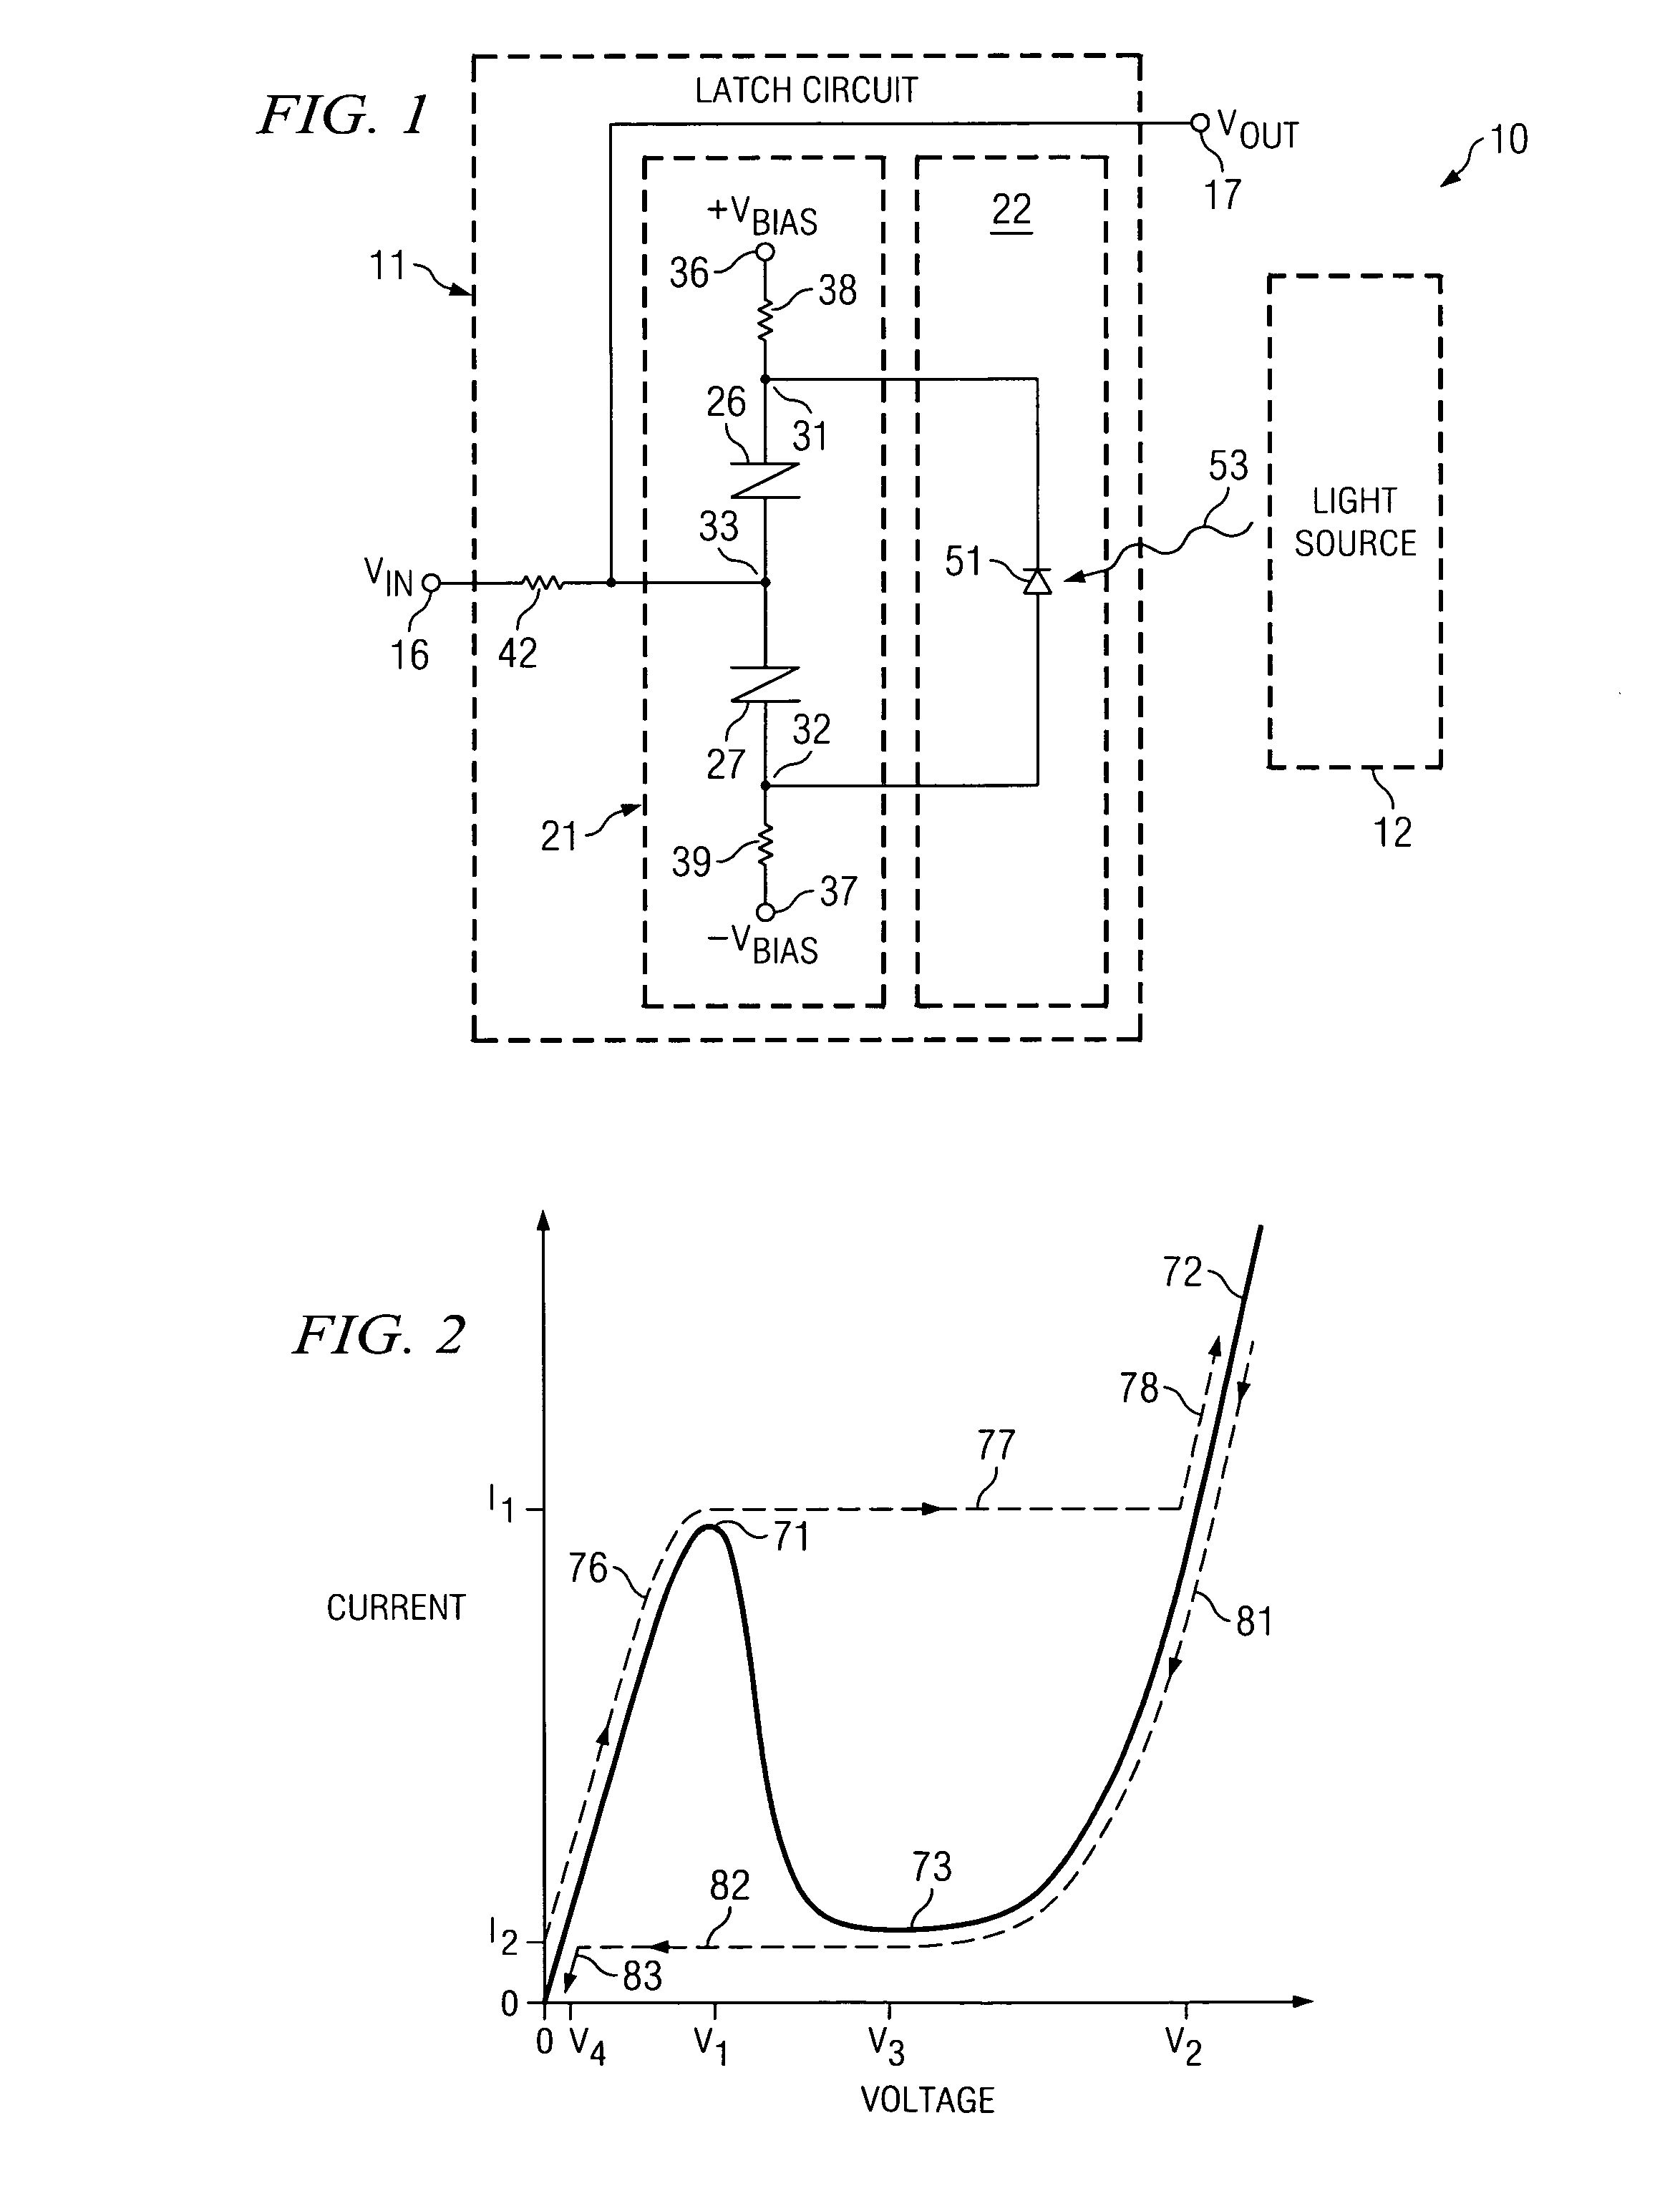 Method and apparatus for resetting a high speed latch circuit